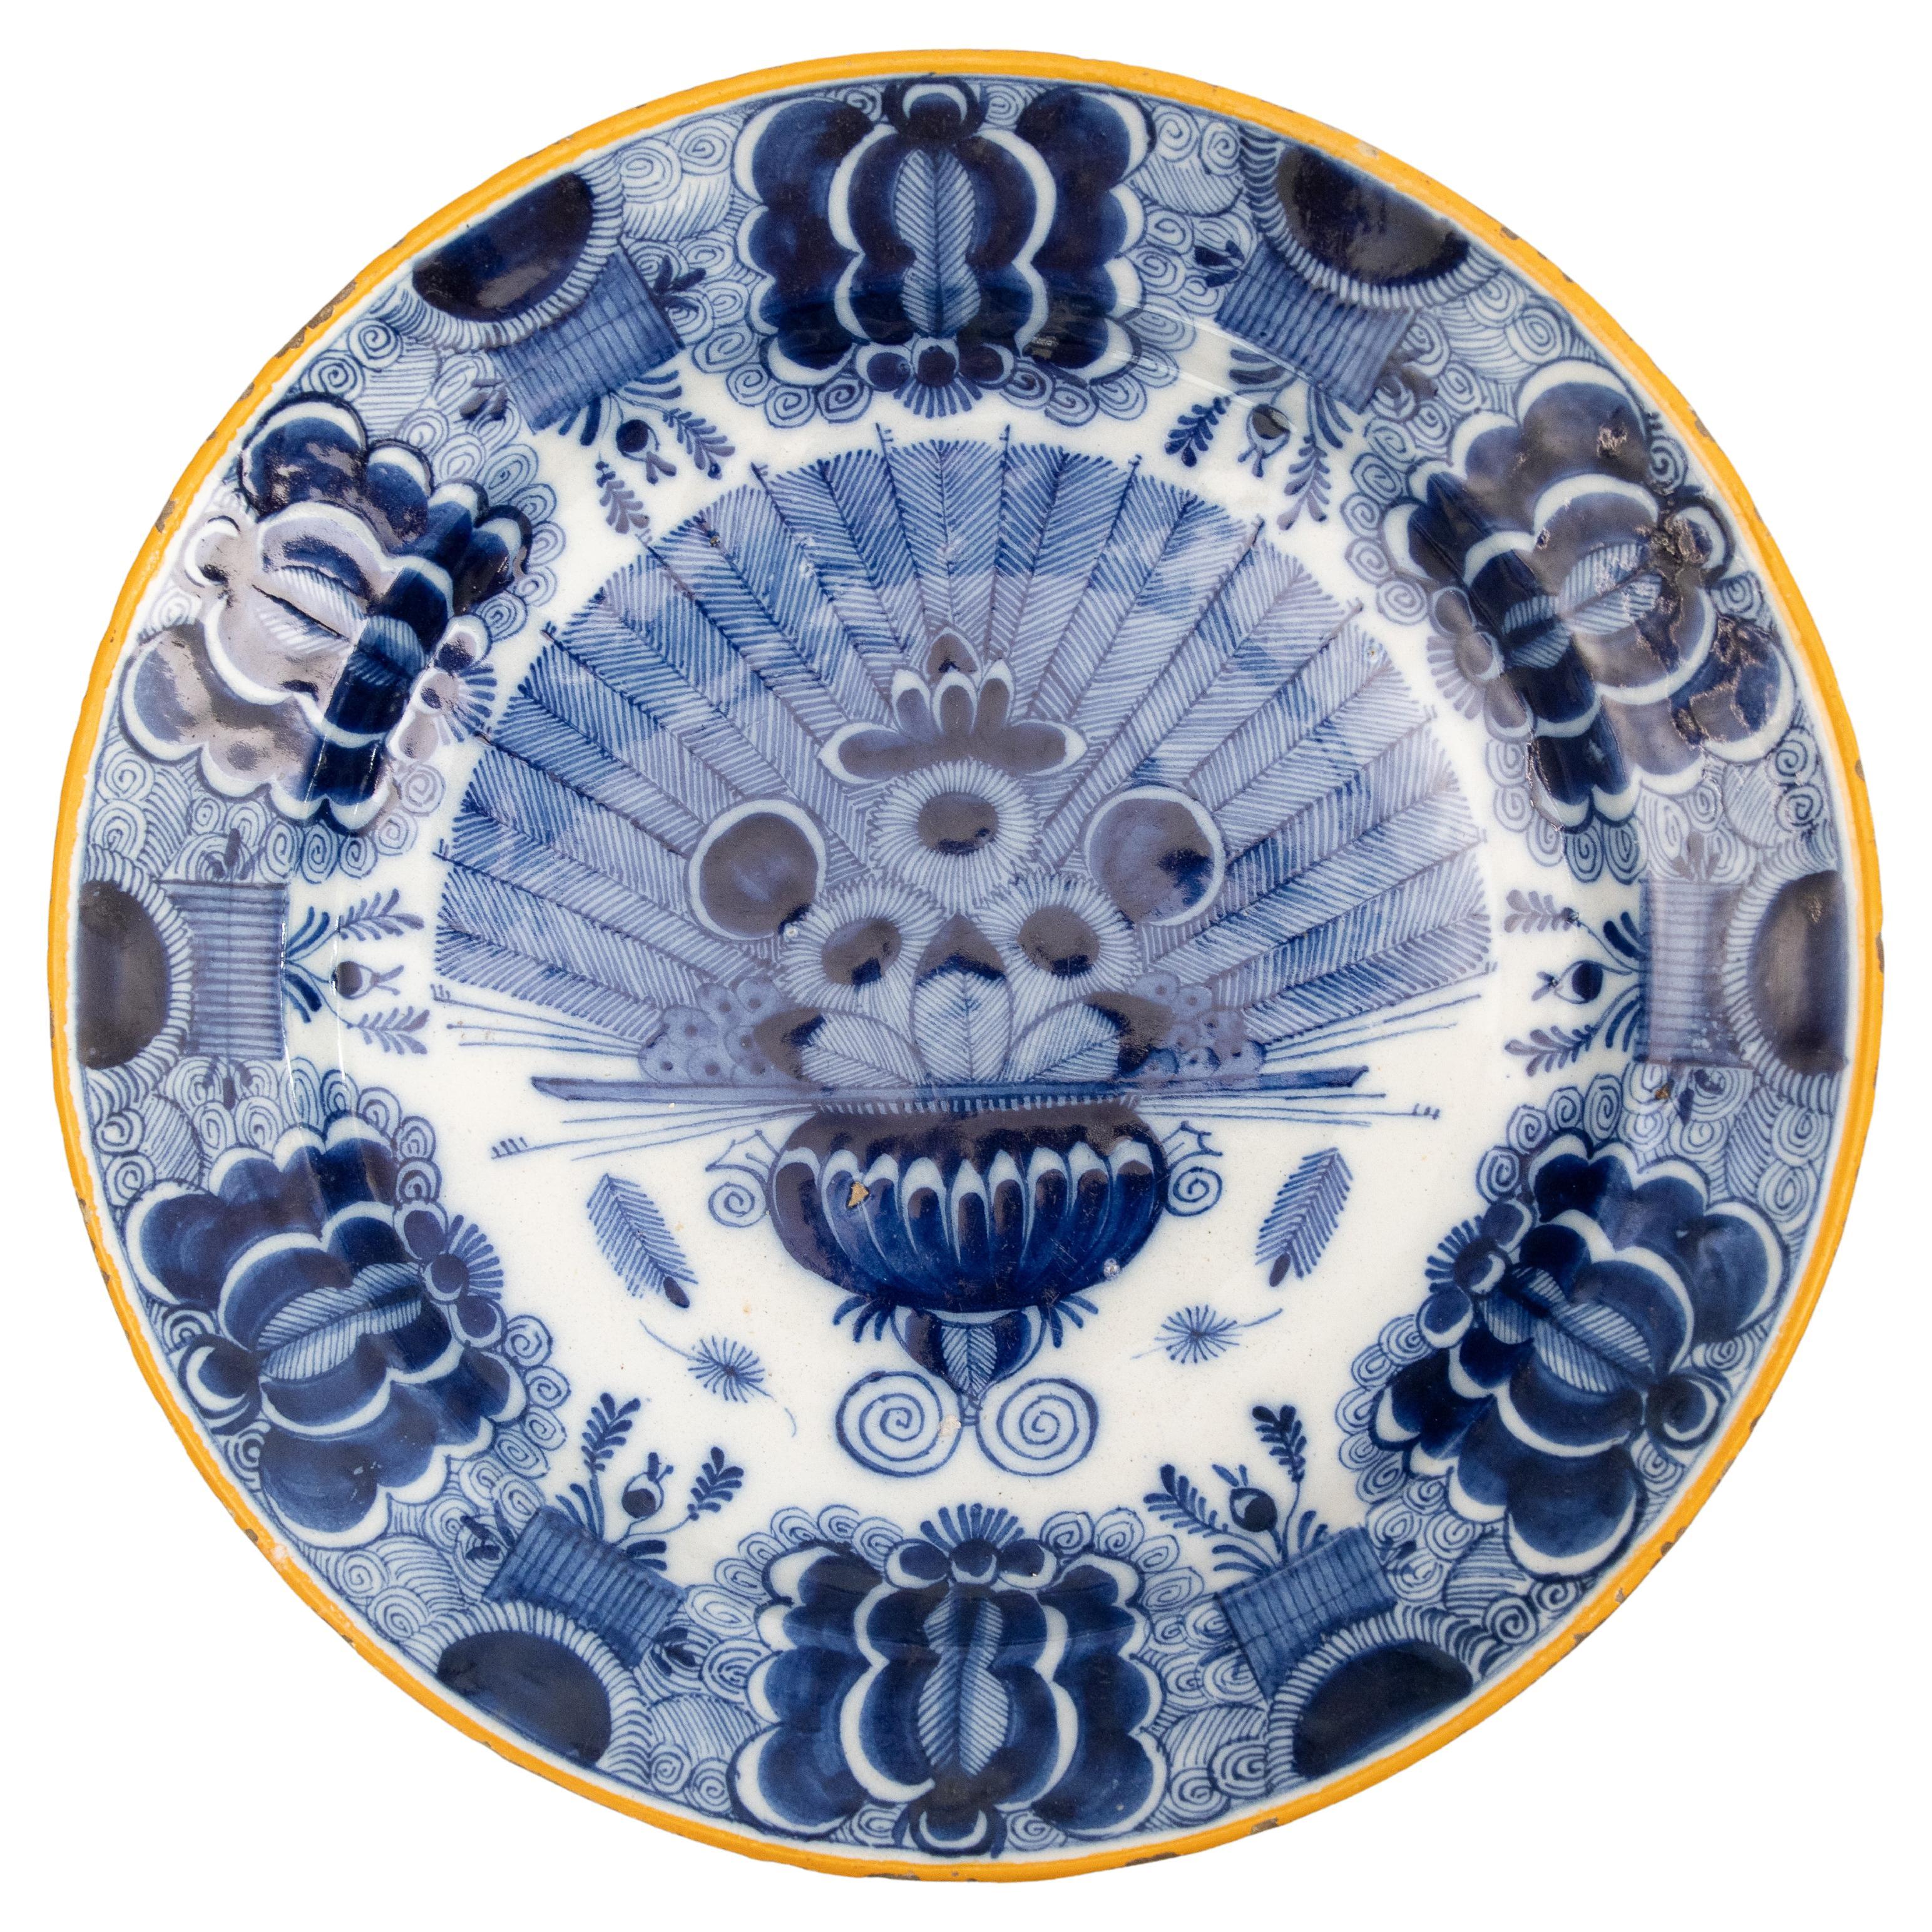 18th Century Dutch Delft Faience Peacock Charger